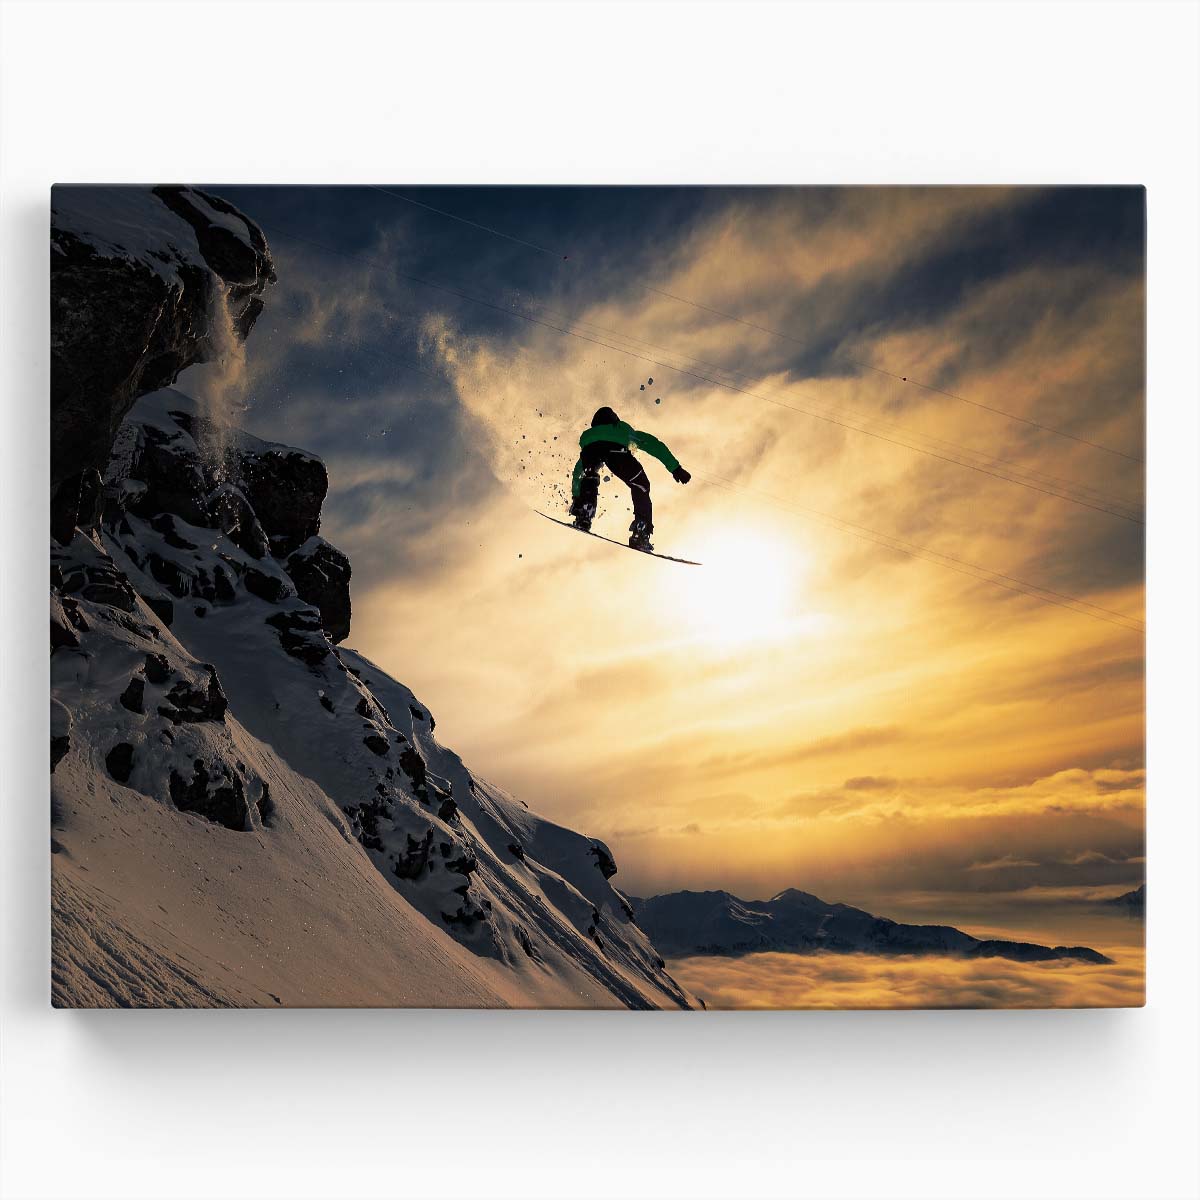 Sunset Snowboarding Adventure Extreme Winter Sports Photography Wall Art by Luxuriance Designs. Made in USA.